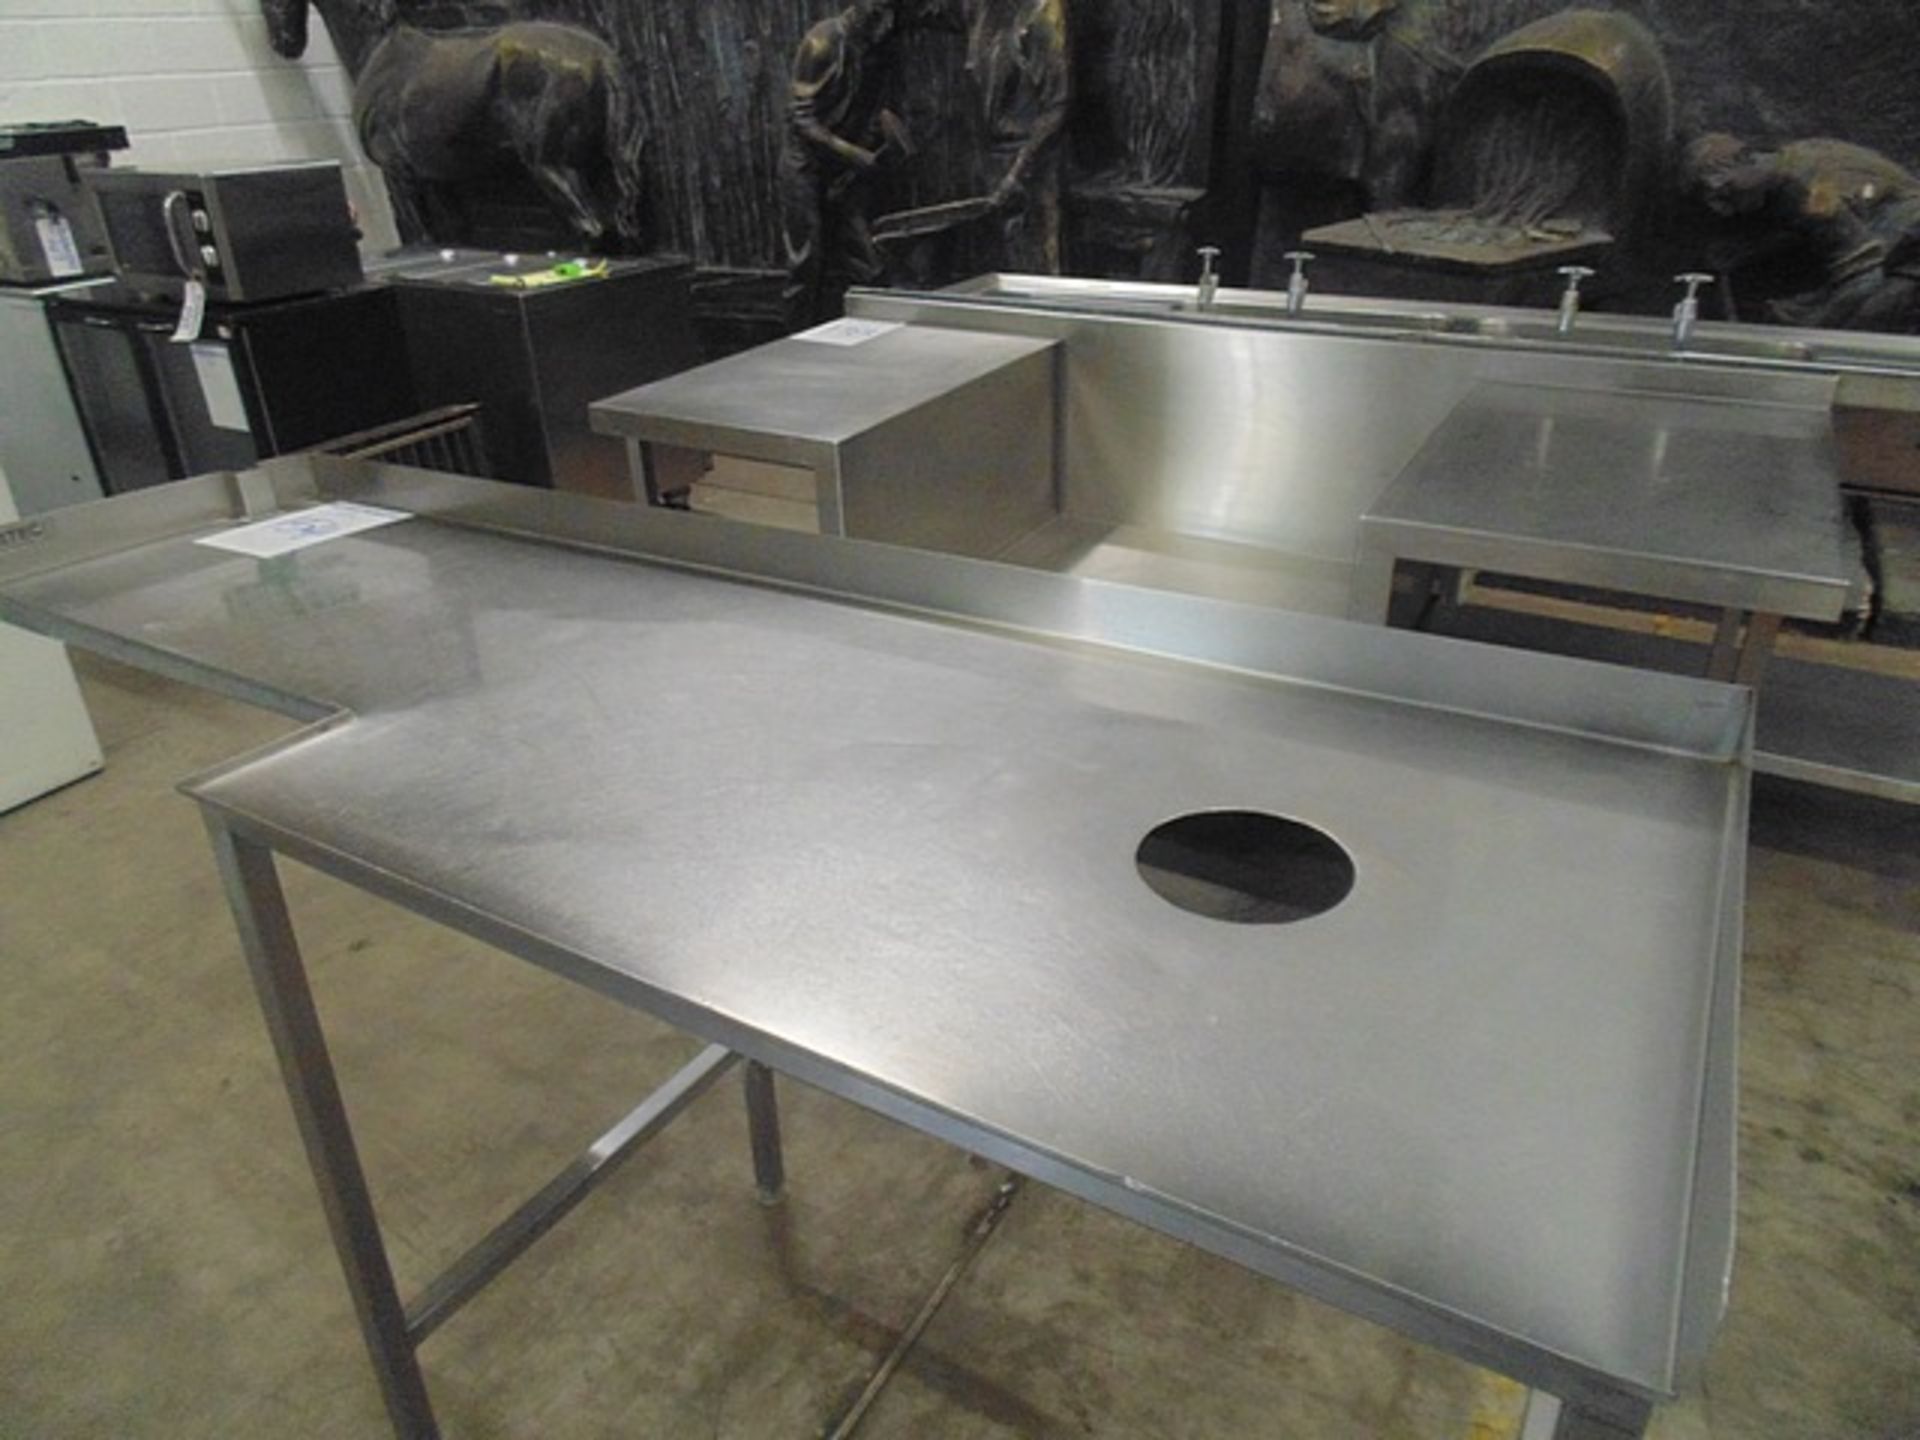 Stainless steel dishwasher tabling 1730mm x 600mm x 960mm - Image 2 of 2